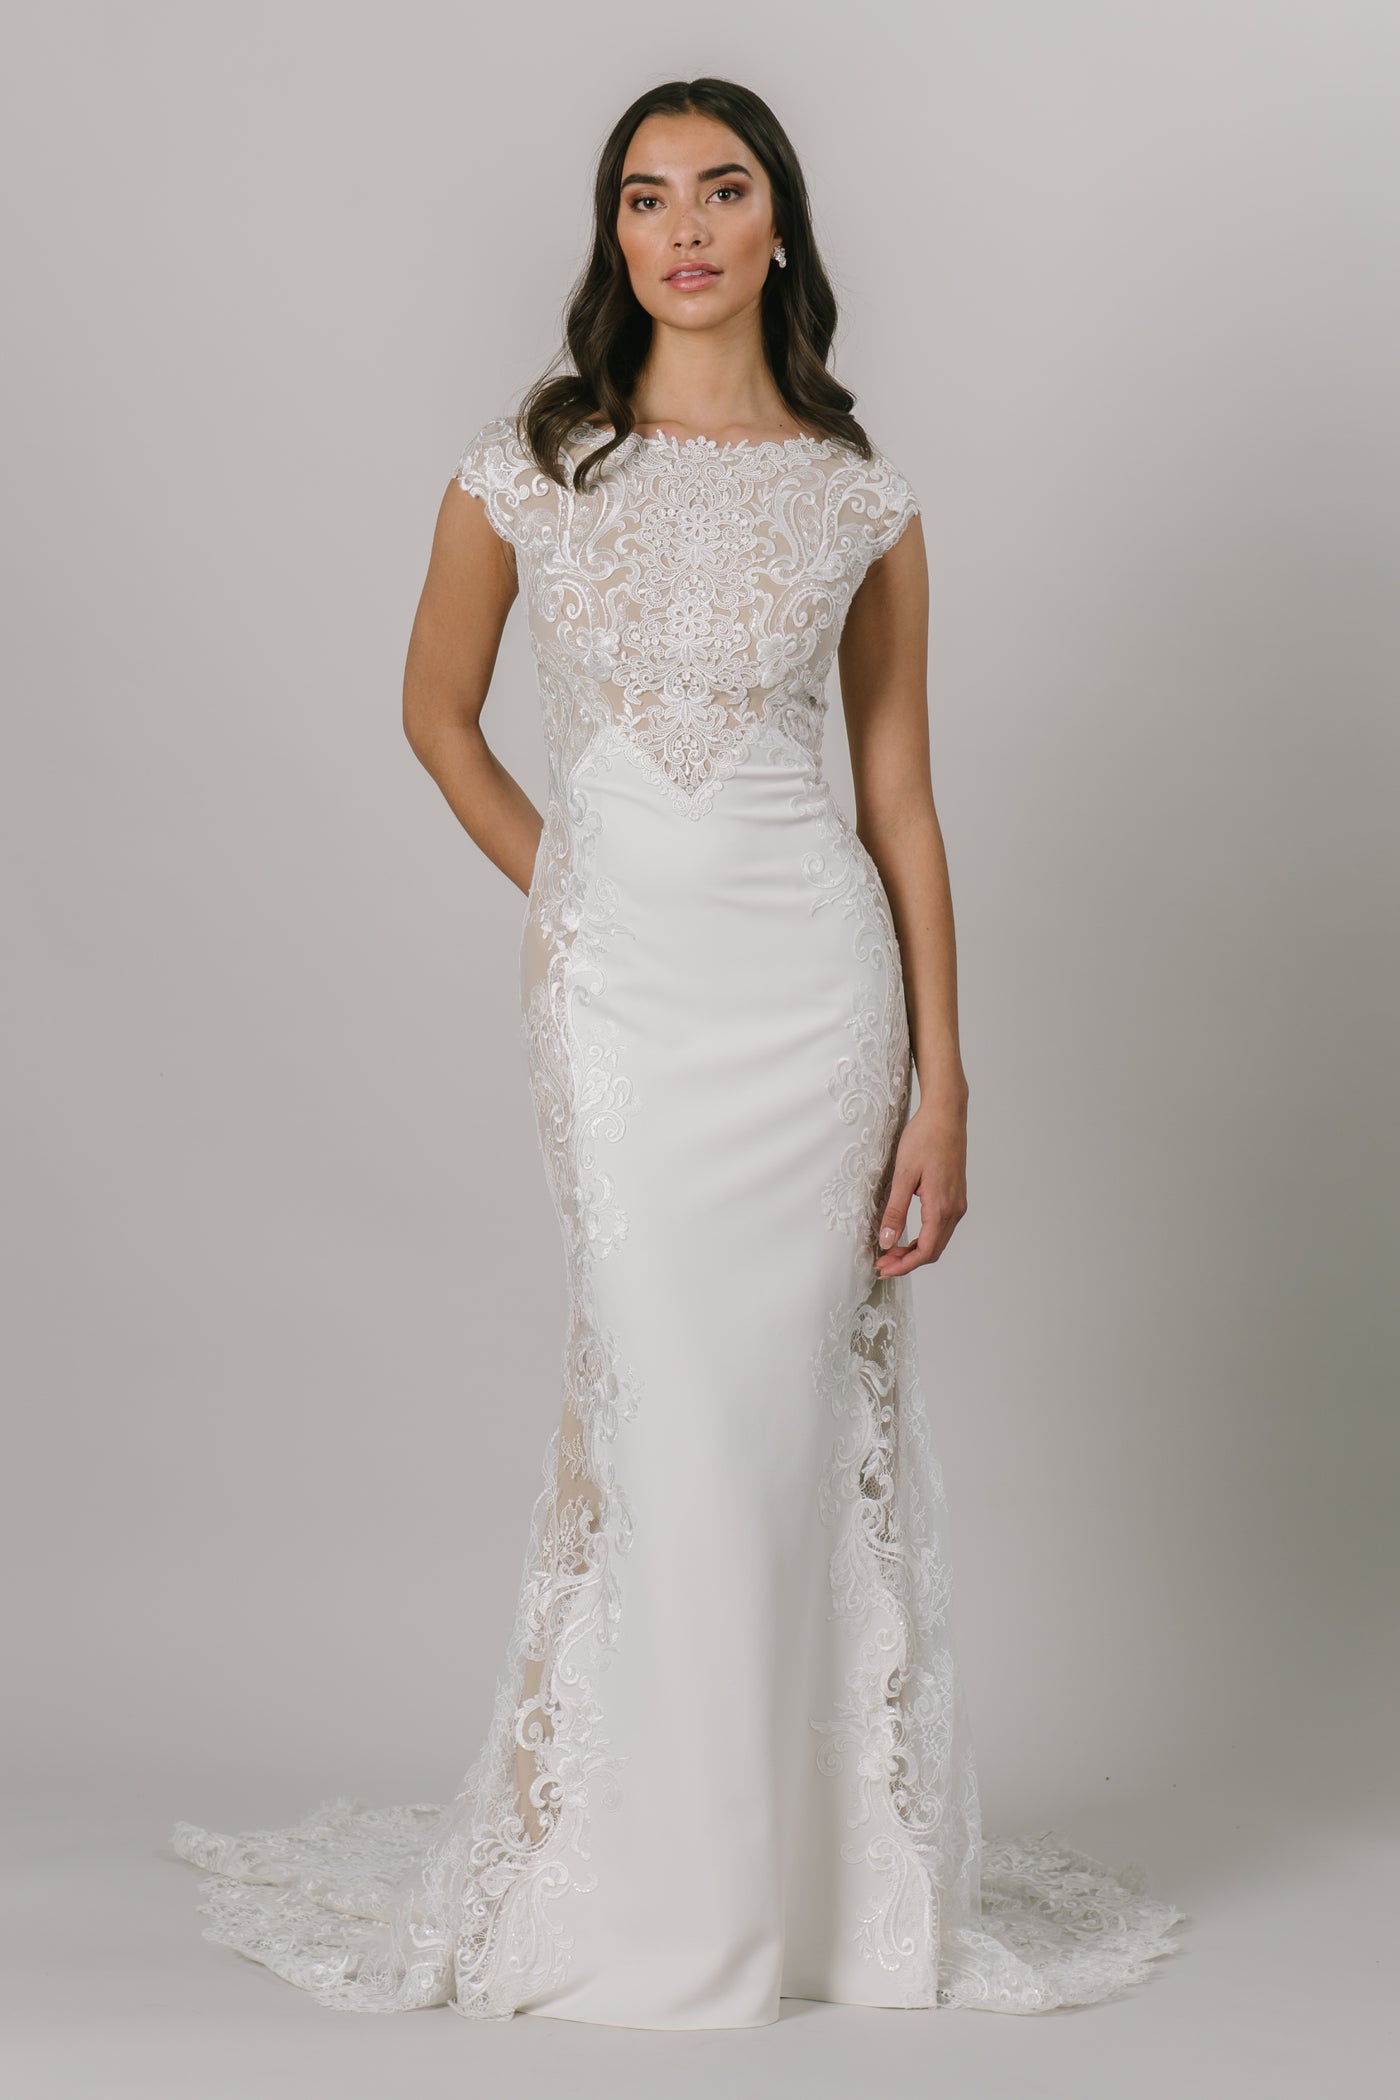 This fit-and-flare, modest wedding dress features gorgeous lace detailing at the top and own the sides of the dress. There are buttons down the back that add a darling compliment to the lace. Shown in Ivory/Nude/Ivory.  Style Love: Nude lining helps the lace pop!